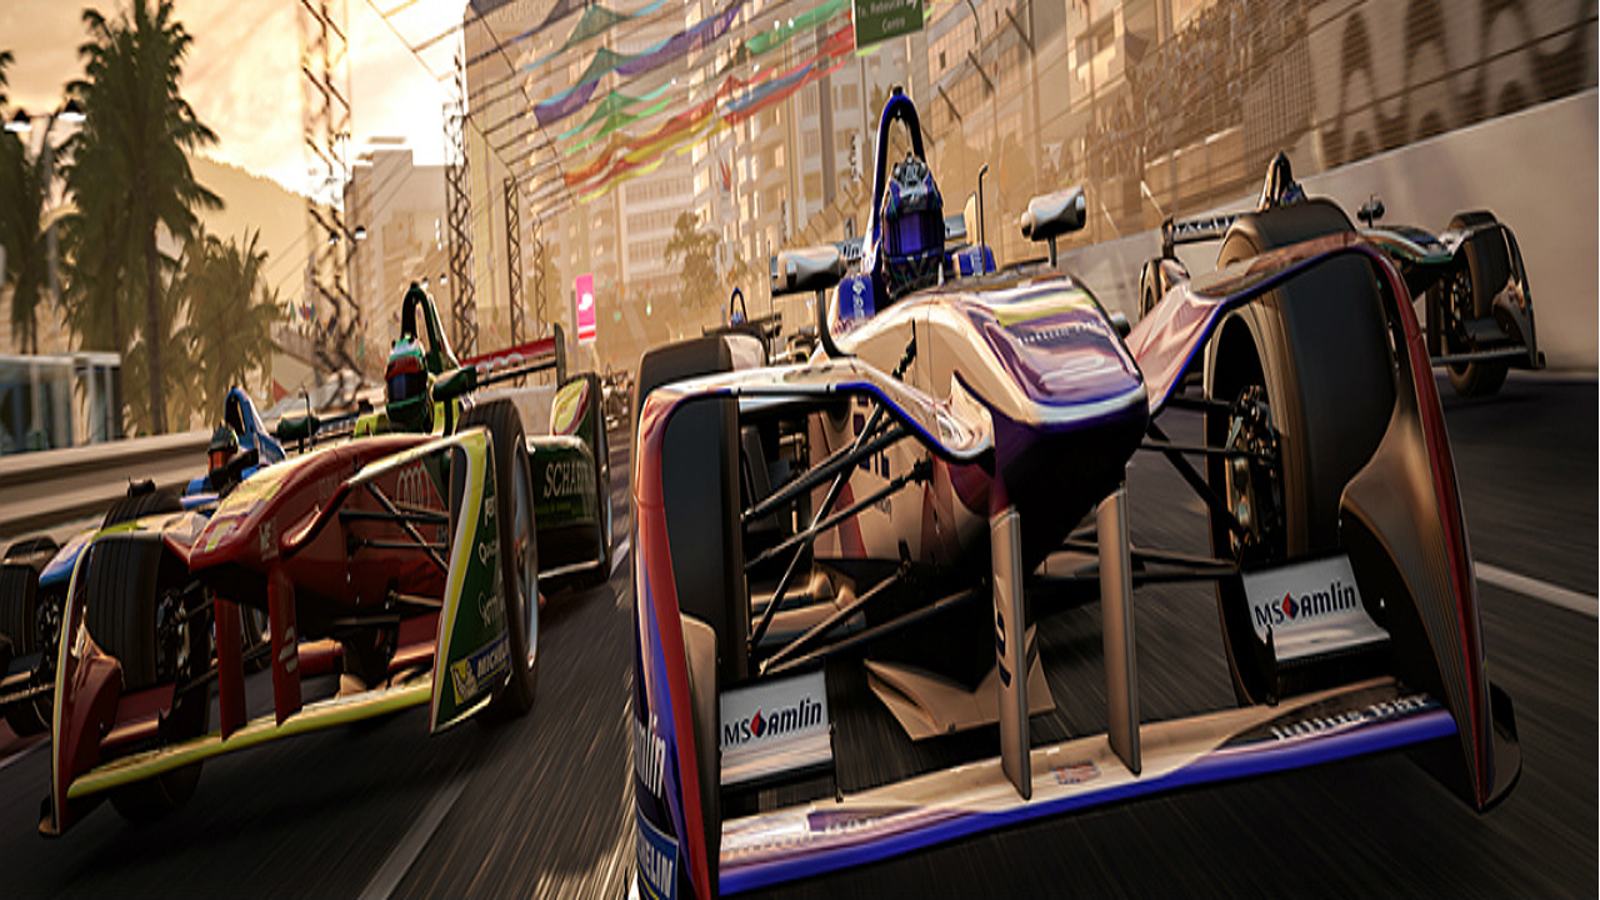 Forza Motorsport looks and feels like Forza but with an RPG hiding